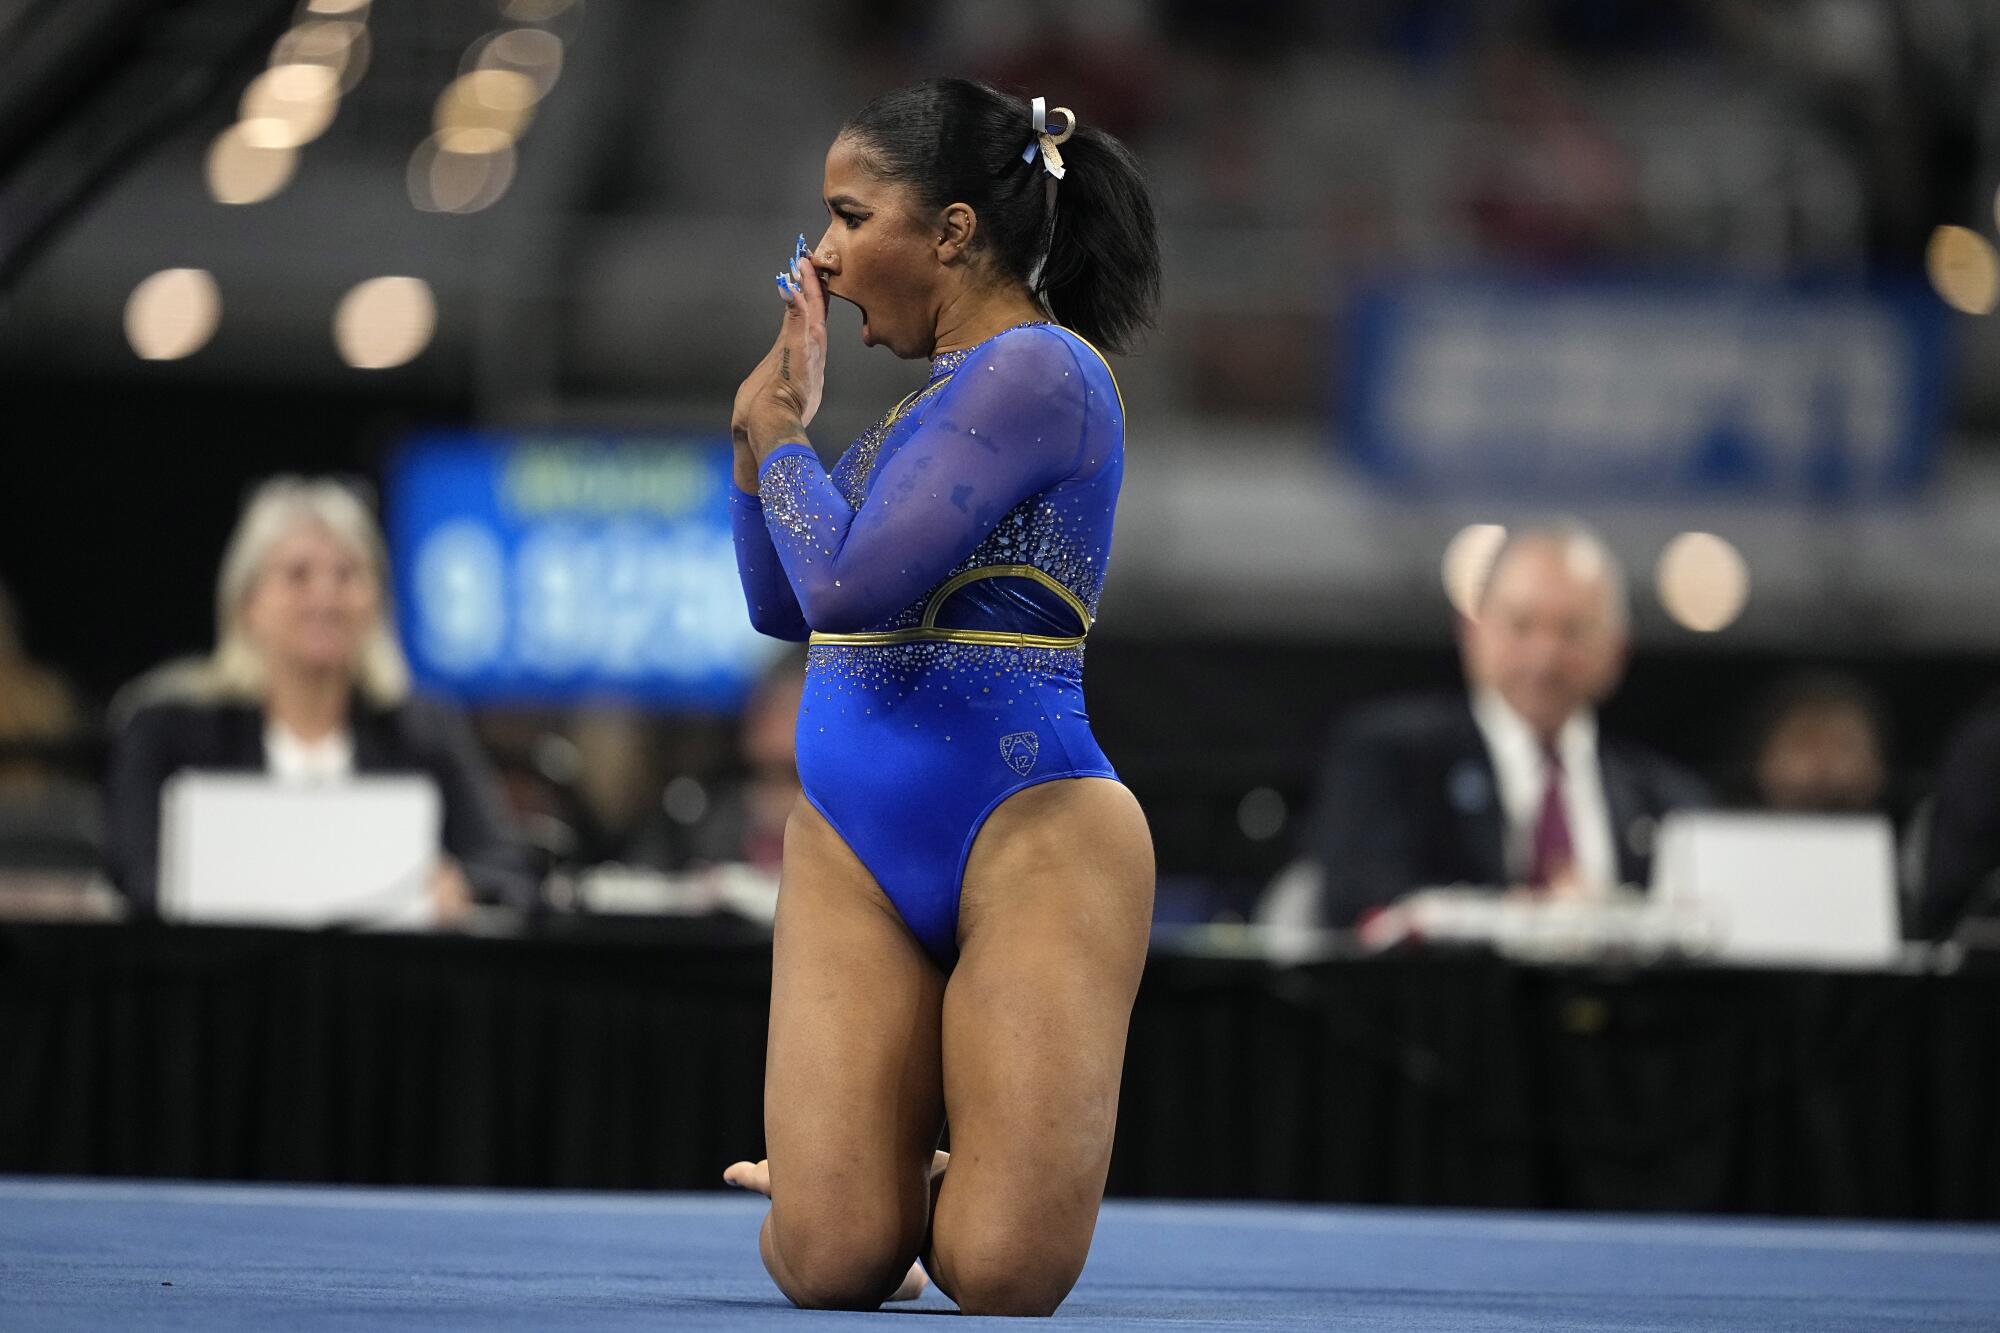 UCLA's Jordan Chiles competes on the floor exercise during the semifinals.